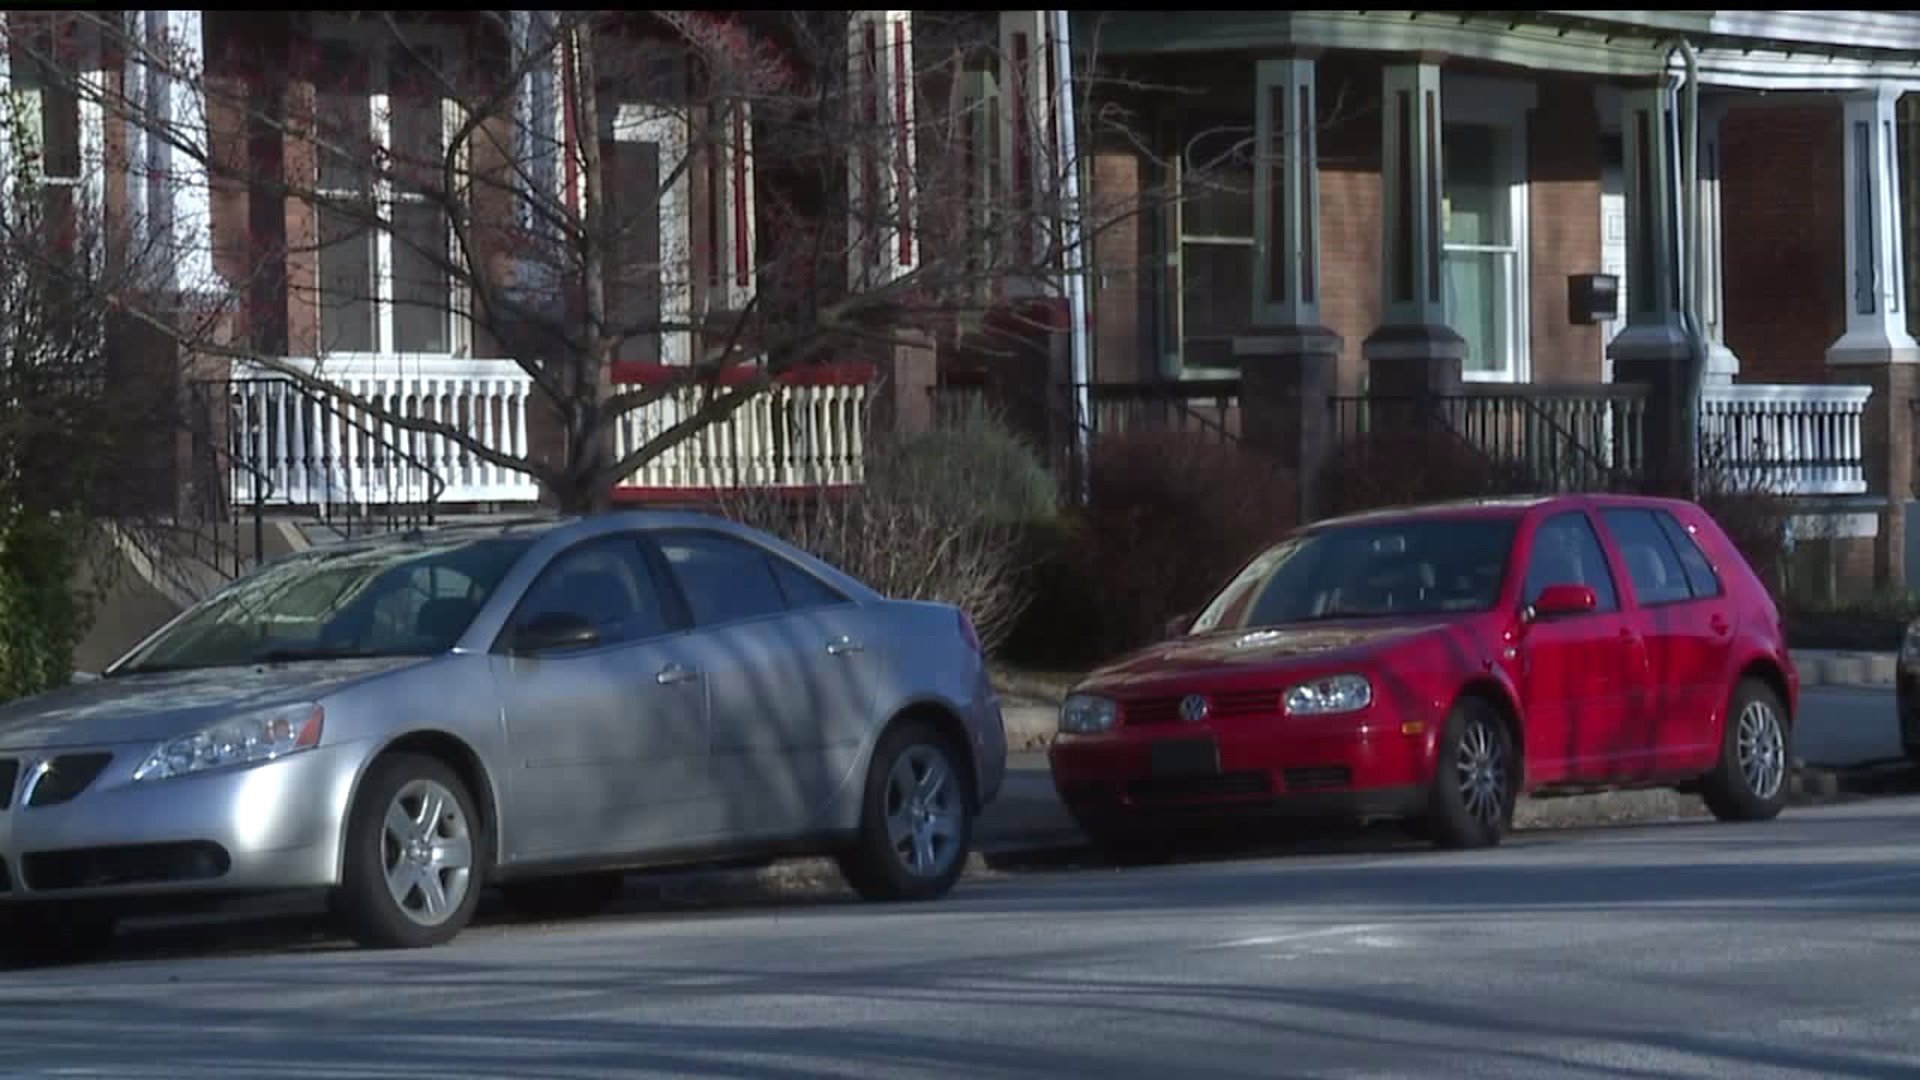 Spike in stolen cars causes Harrisburg police to take a new approach